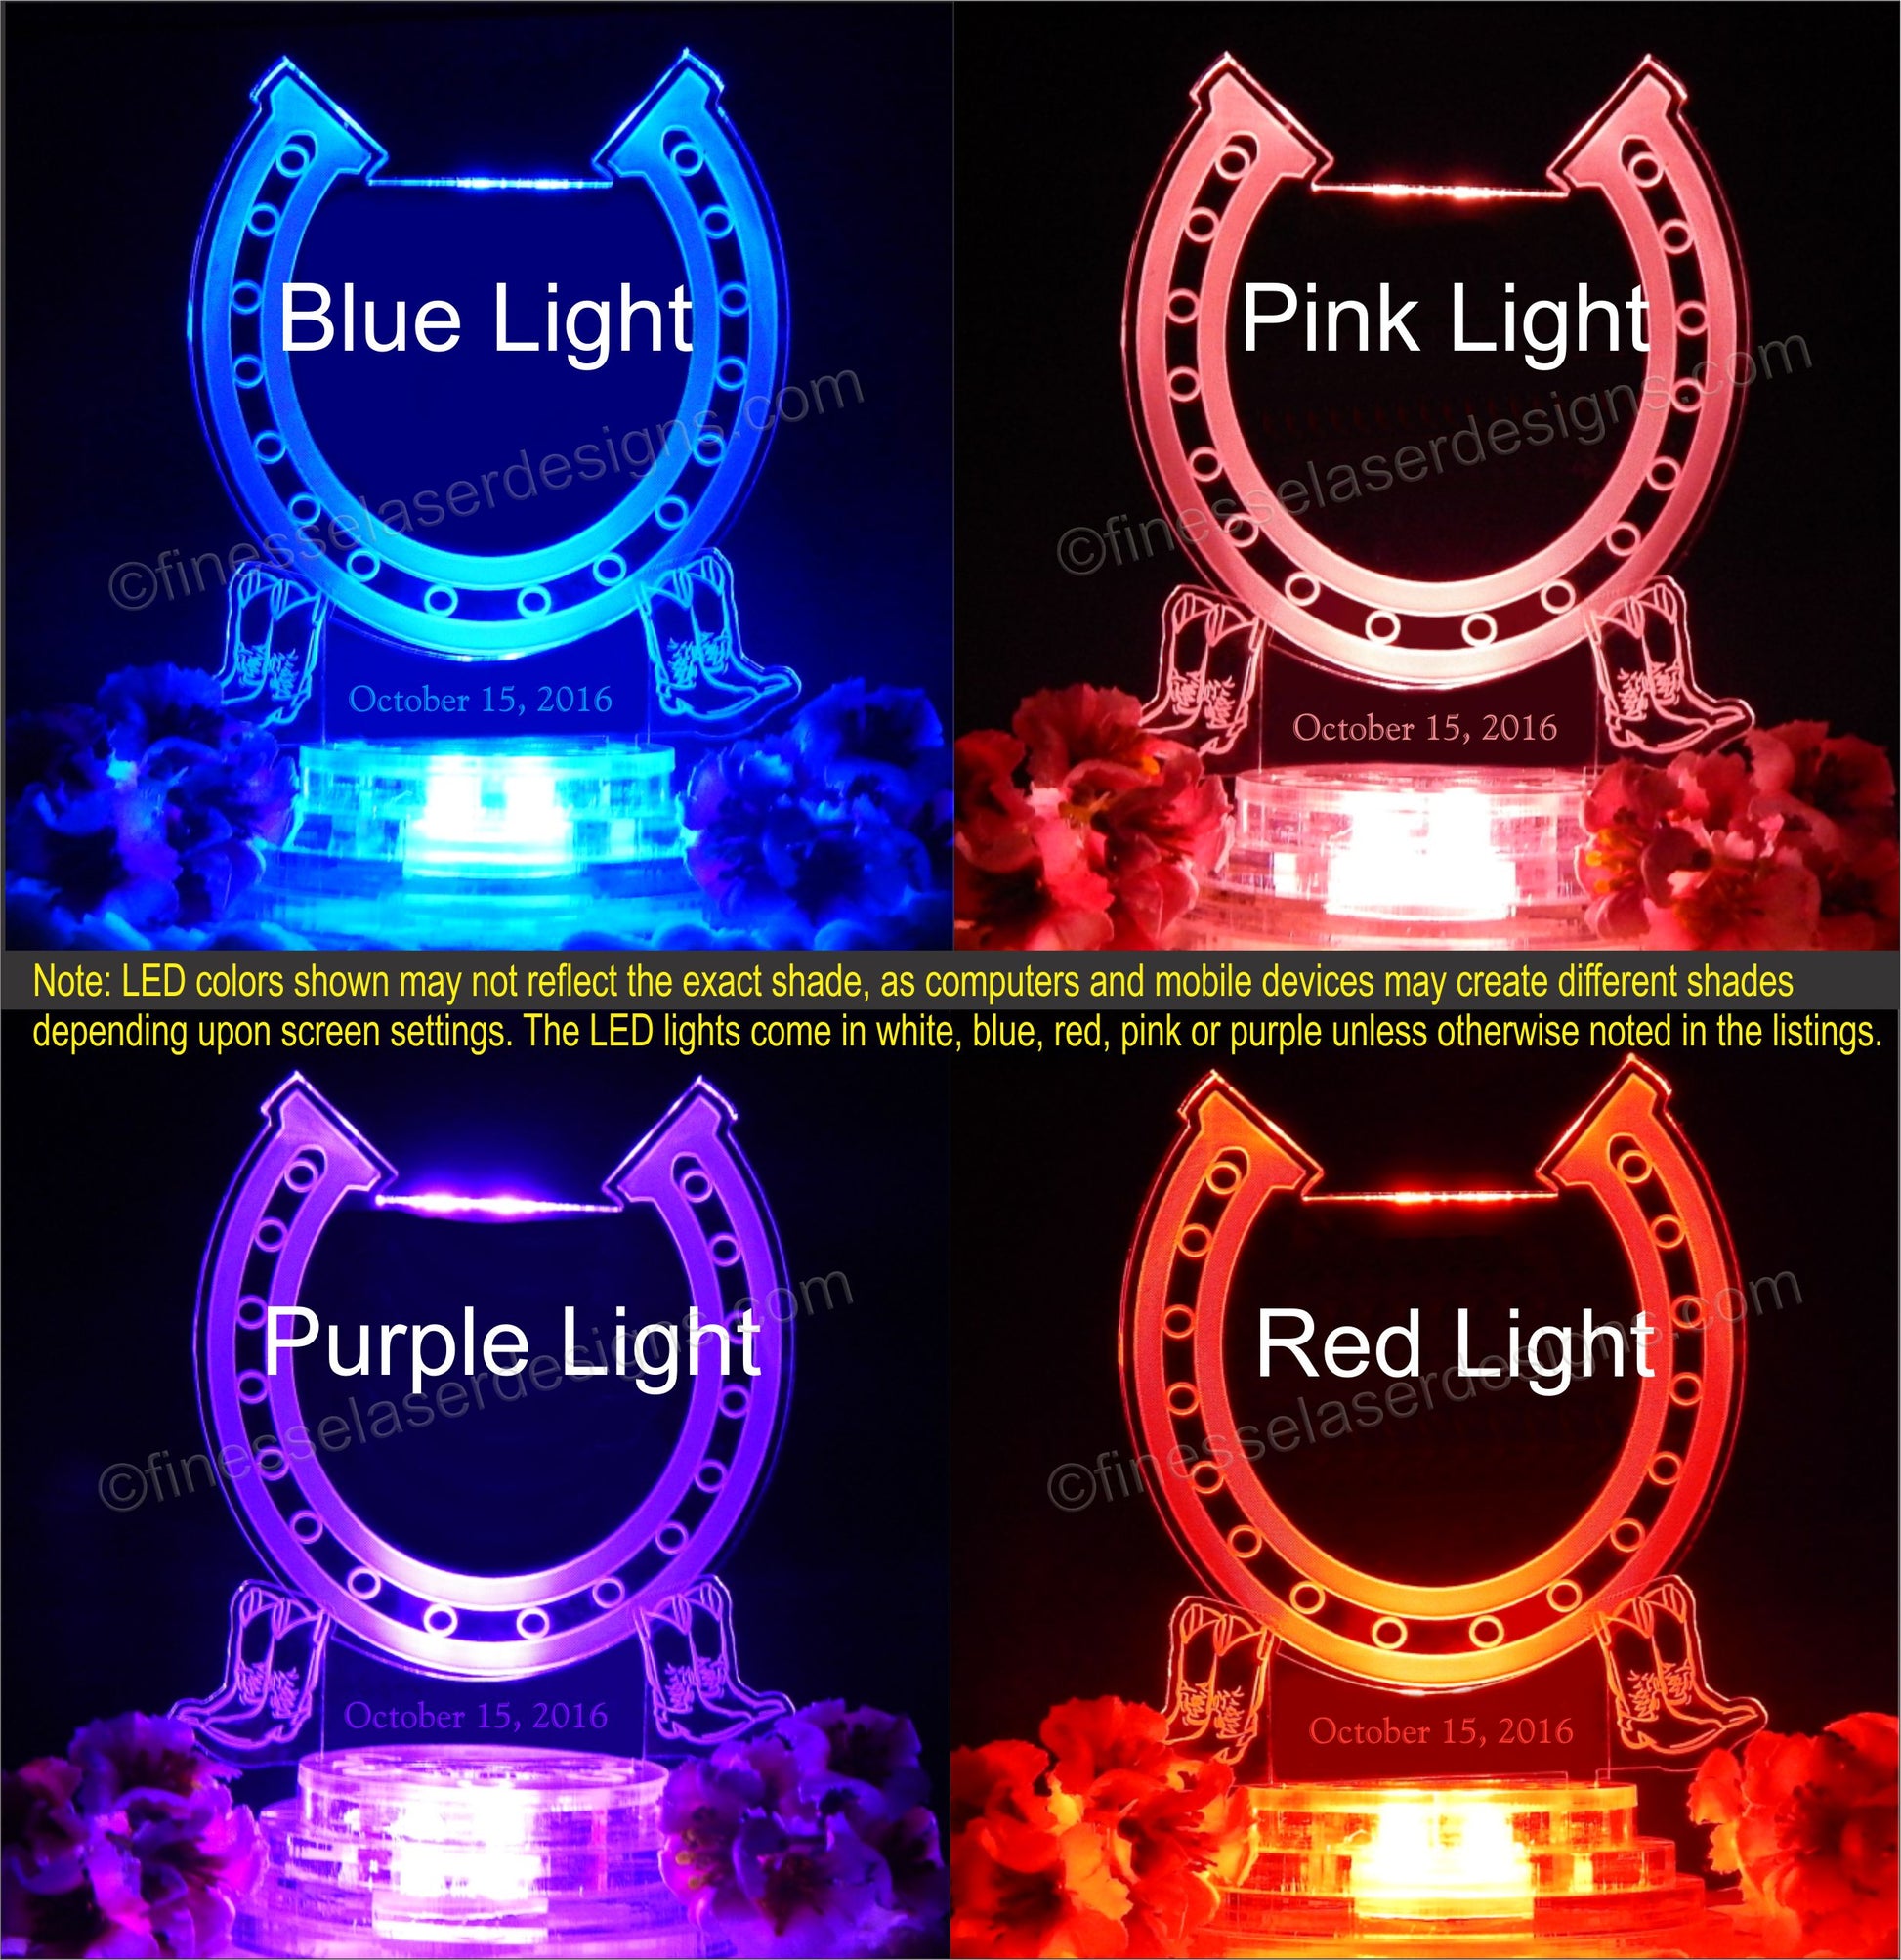 Colored views of acrylic horseshoe shaped cake topper showing pink, purple, blue, and red lighted views